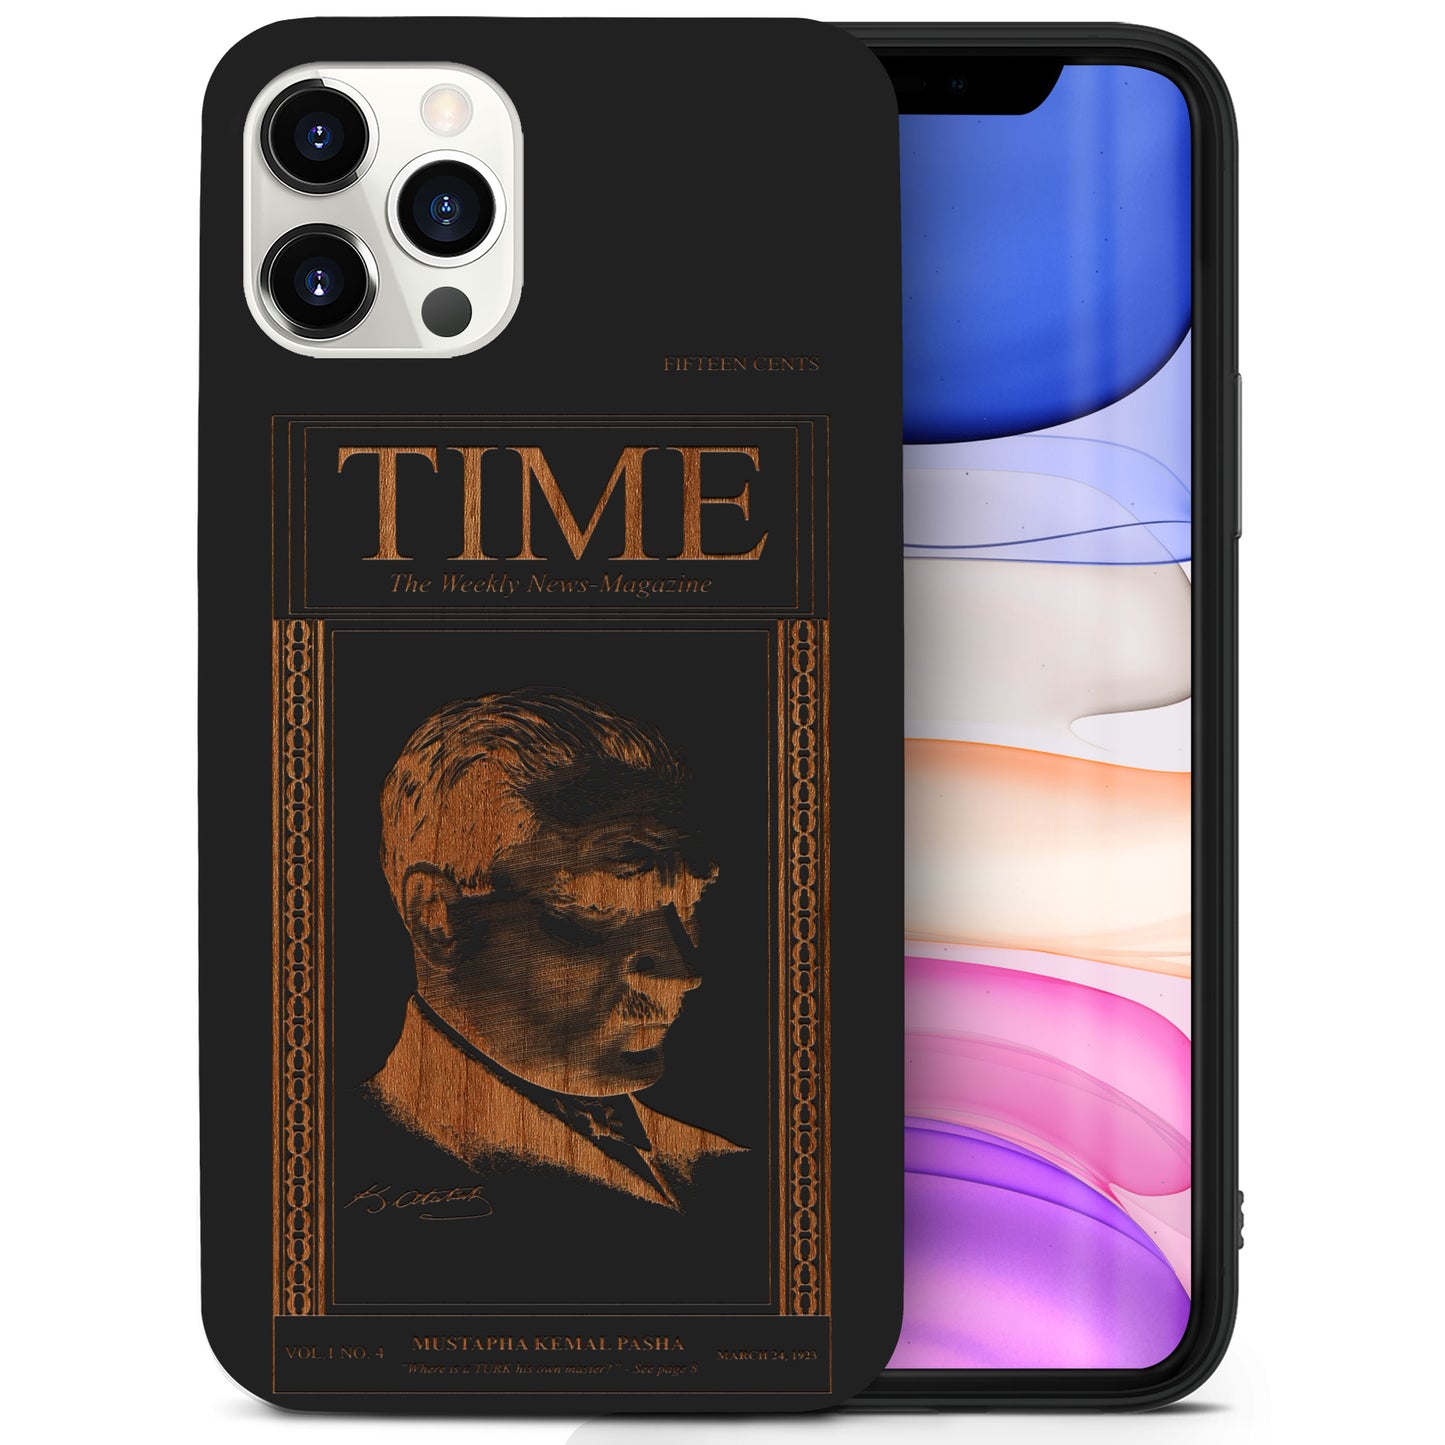 Wooden Cell Phone Case Cover, Laser Engraved case for iPhone & Samsung phone Time Magazine Design